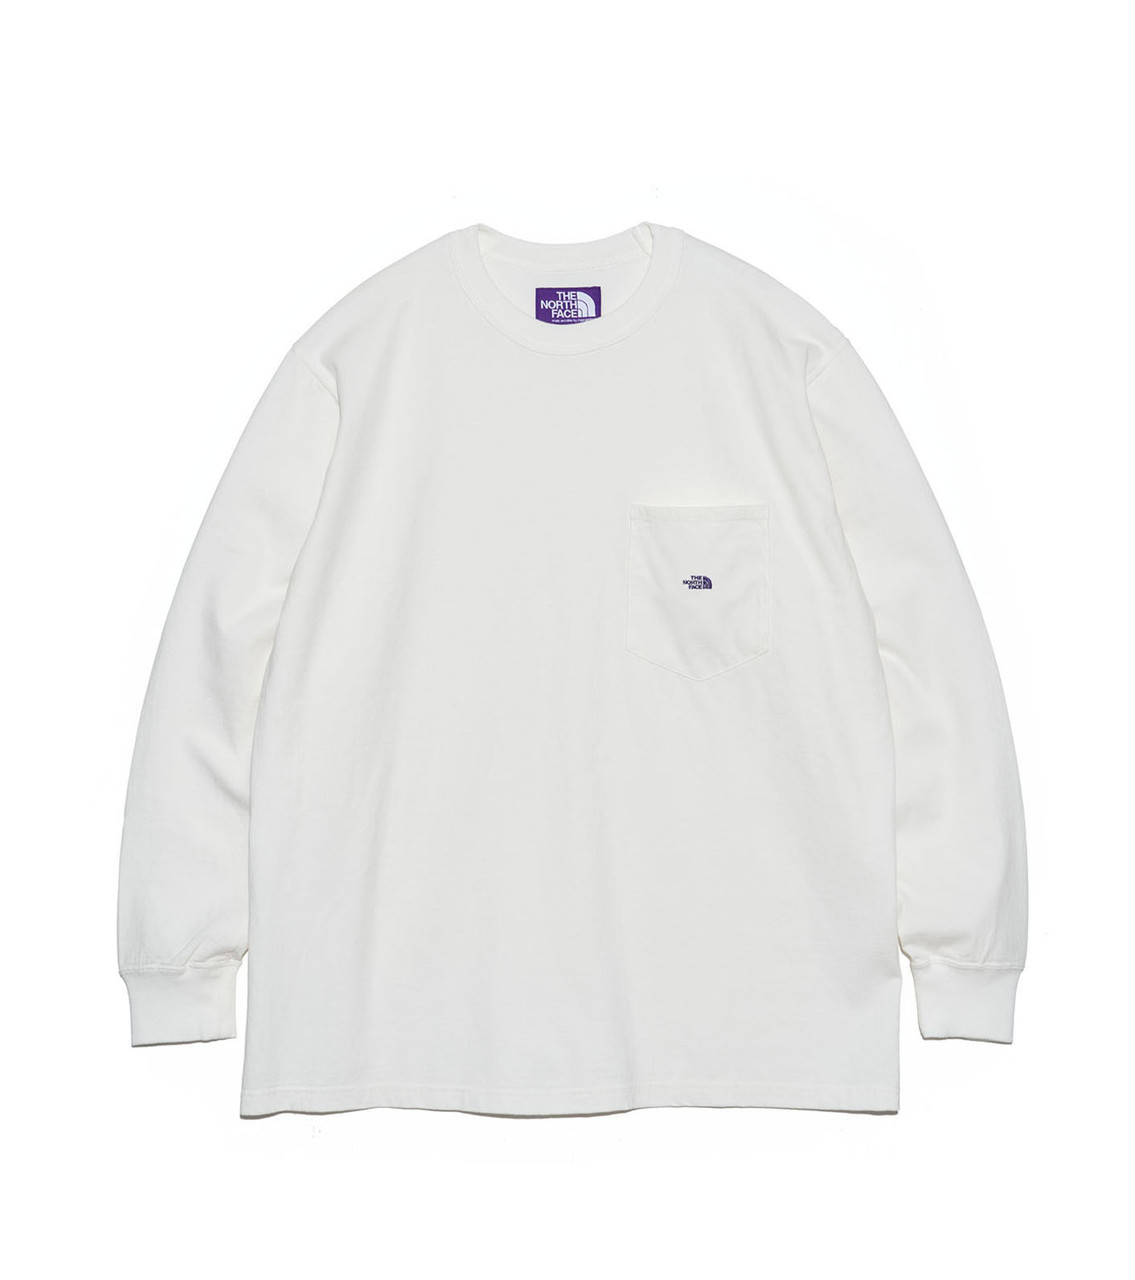 THE NORTH FACE PURPLE LABEL T-SHIRT 7oz Long Sleeve